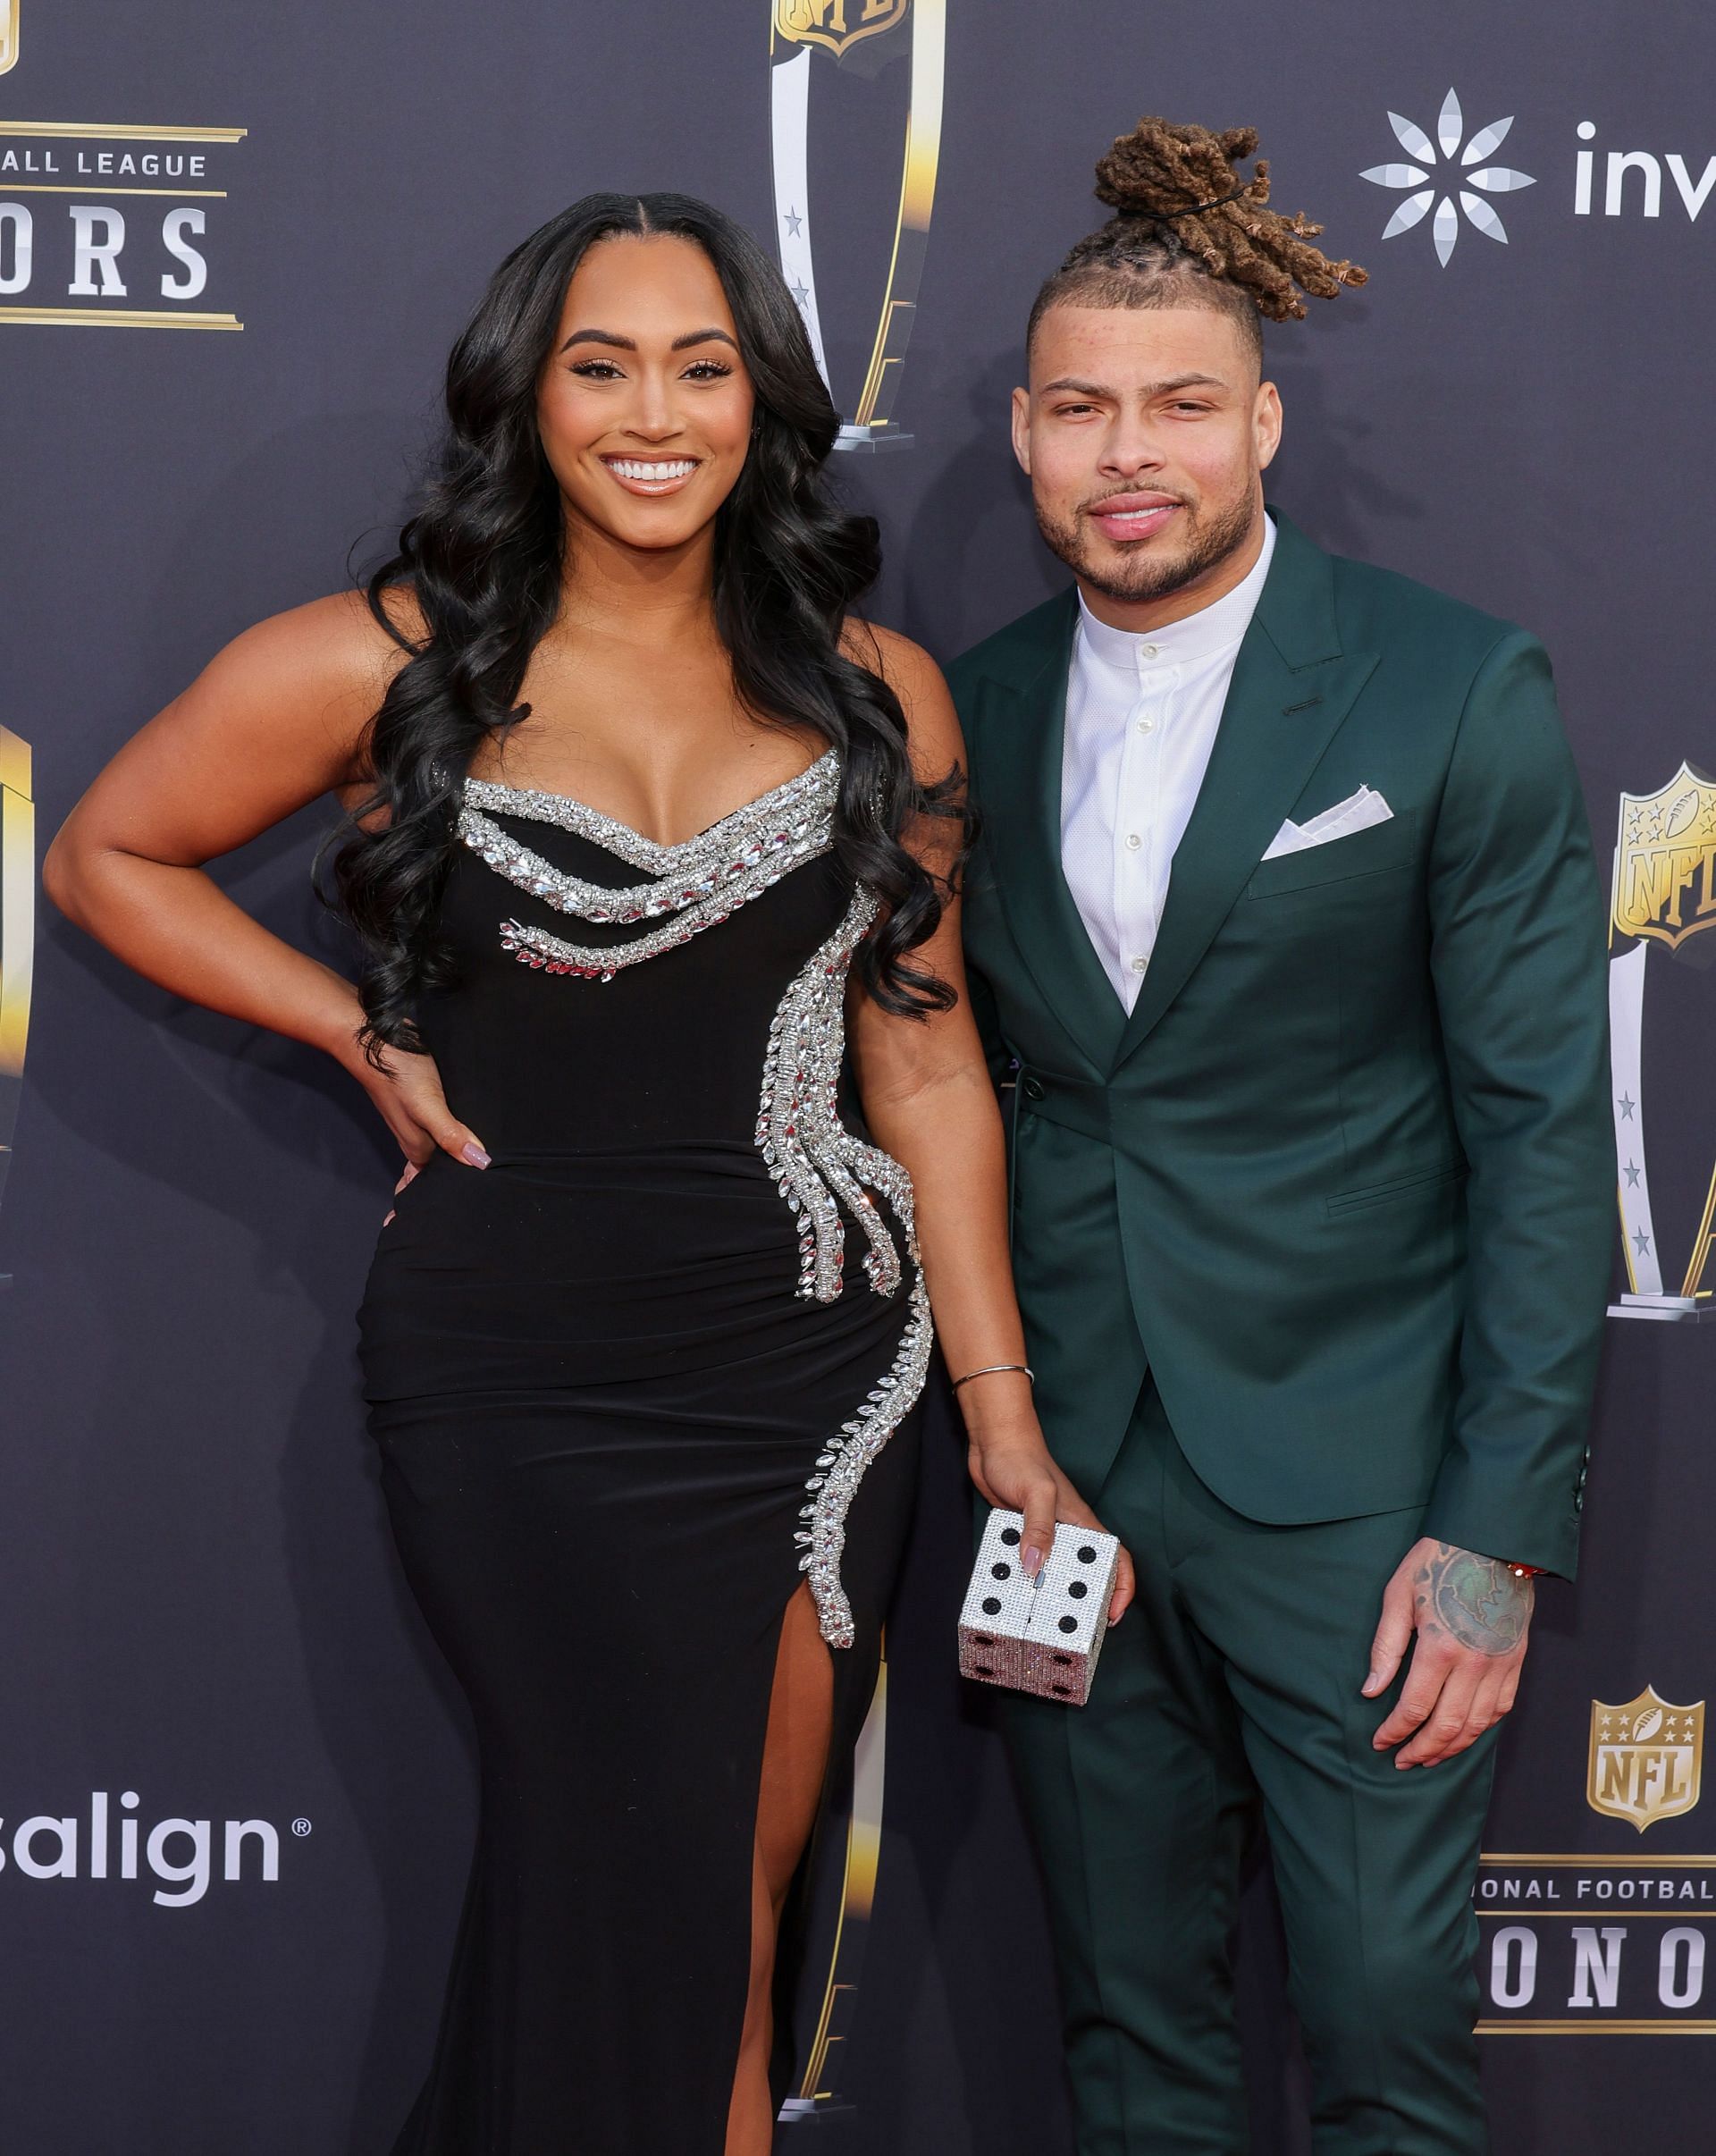 New Orleans Saints safety Tyrann Mathieu and his girlfriend, Sydni Paige Russell